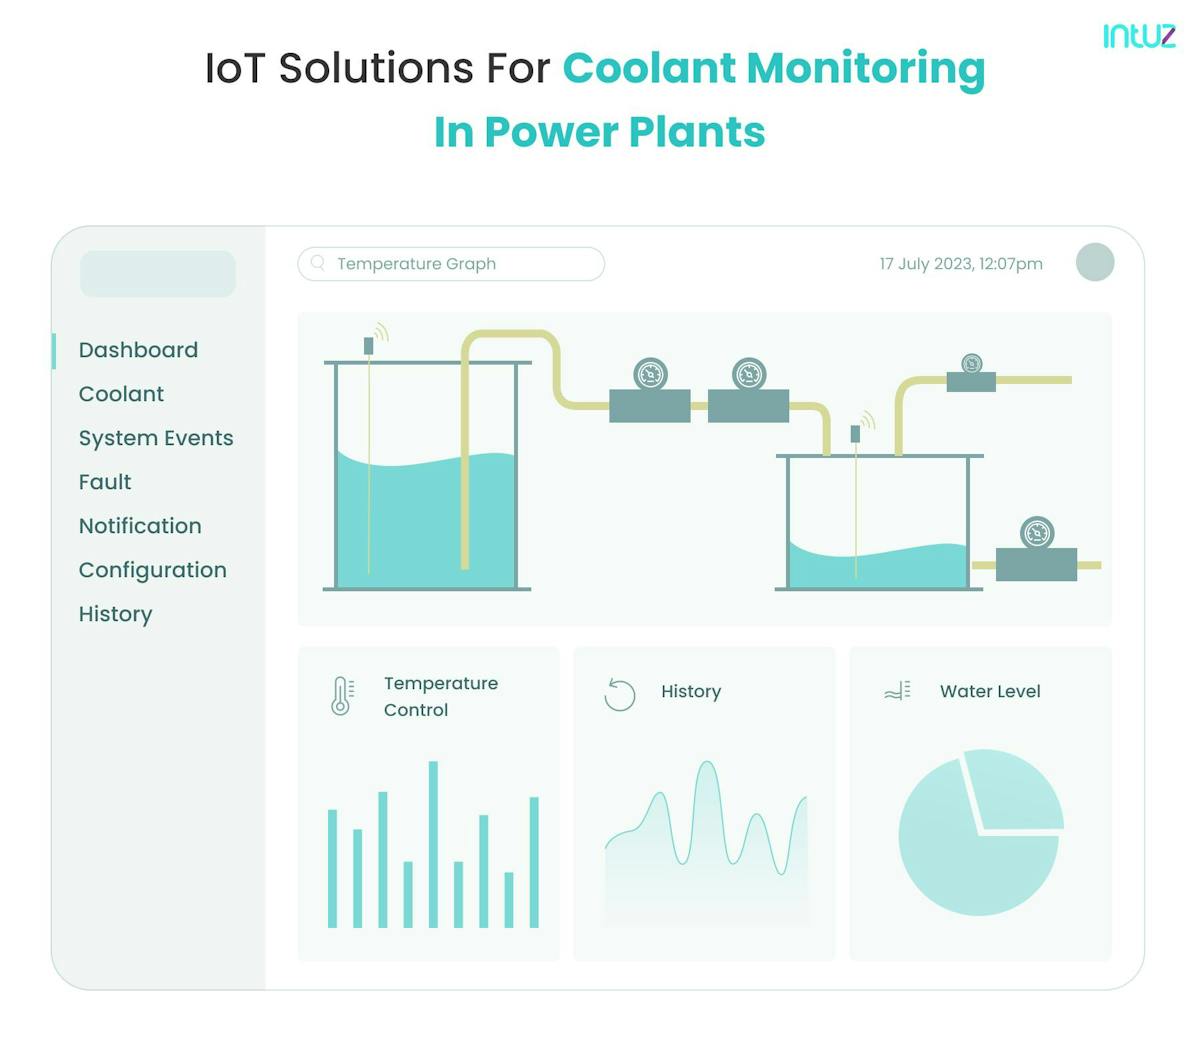 IoT solutions for coolant monitoring in power plants